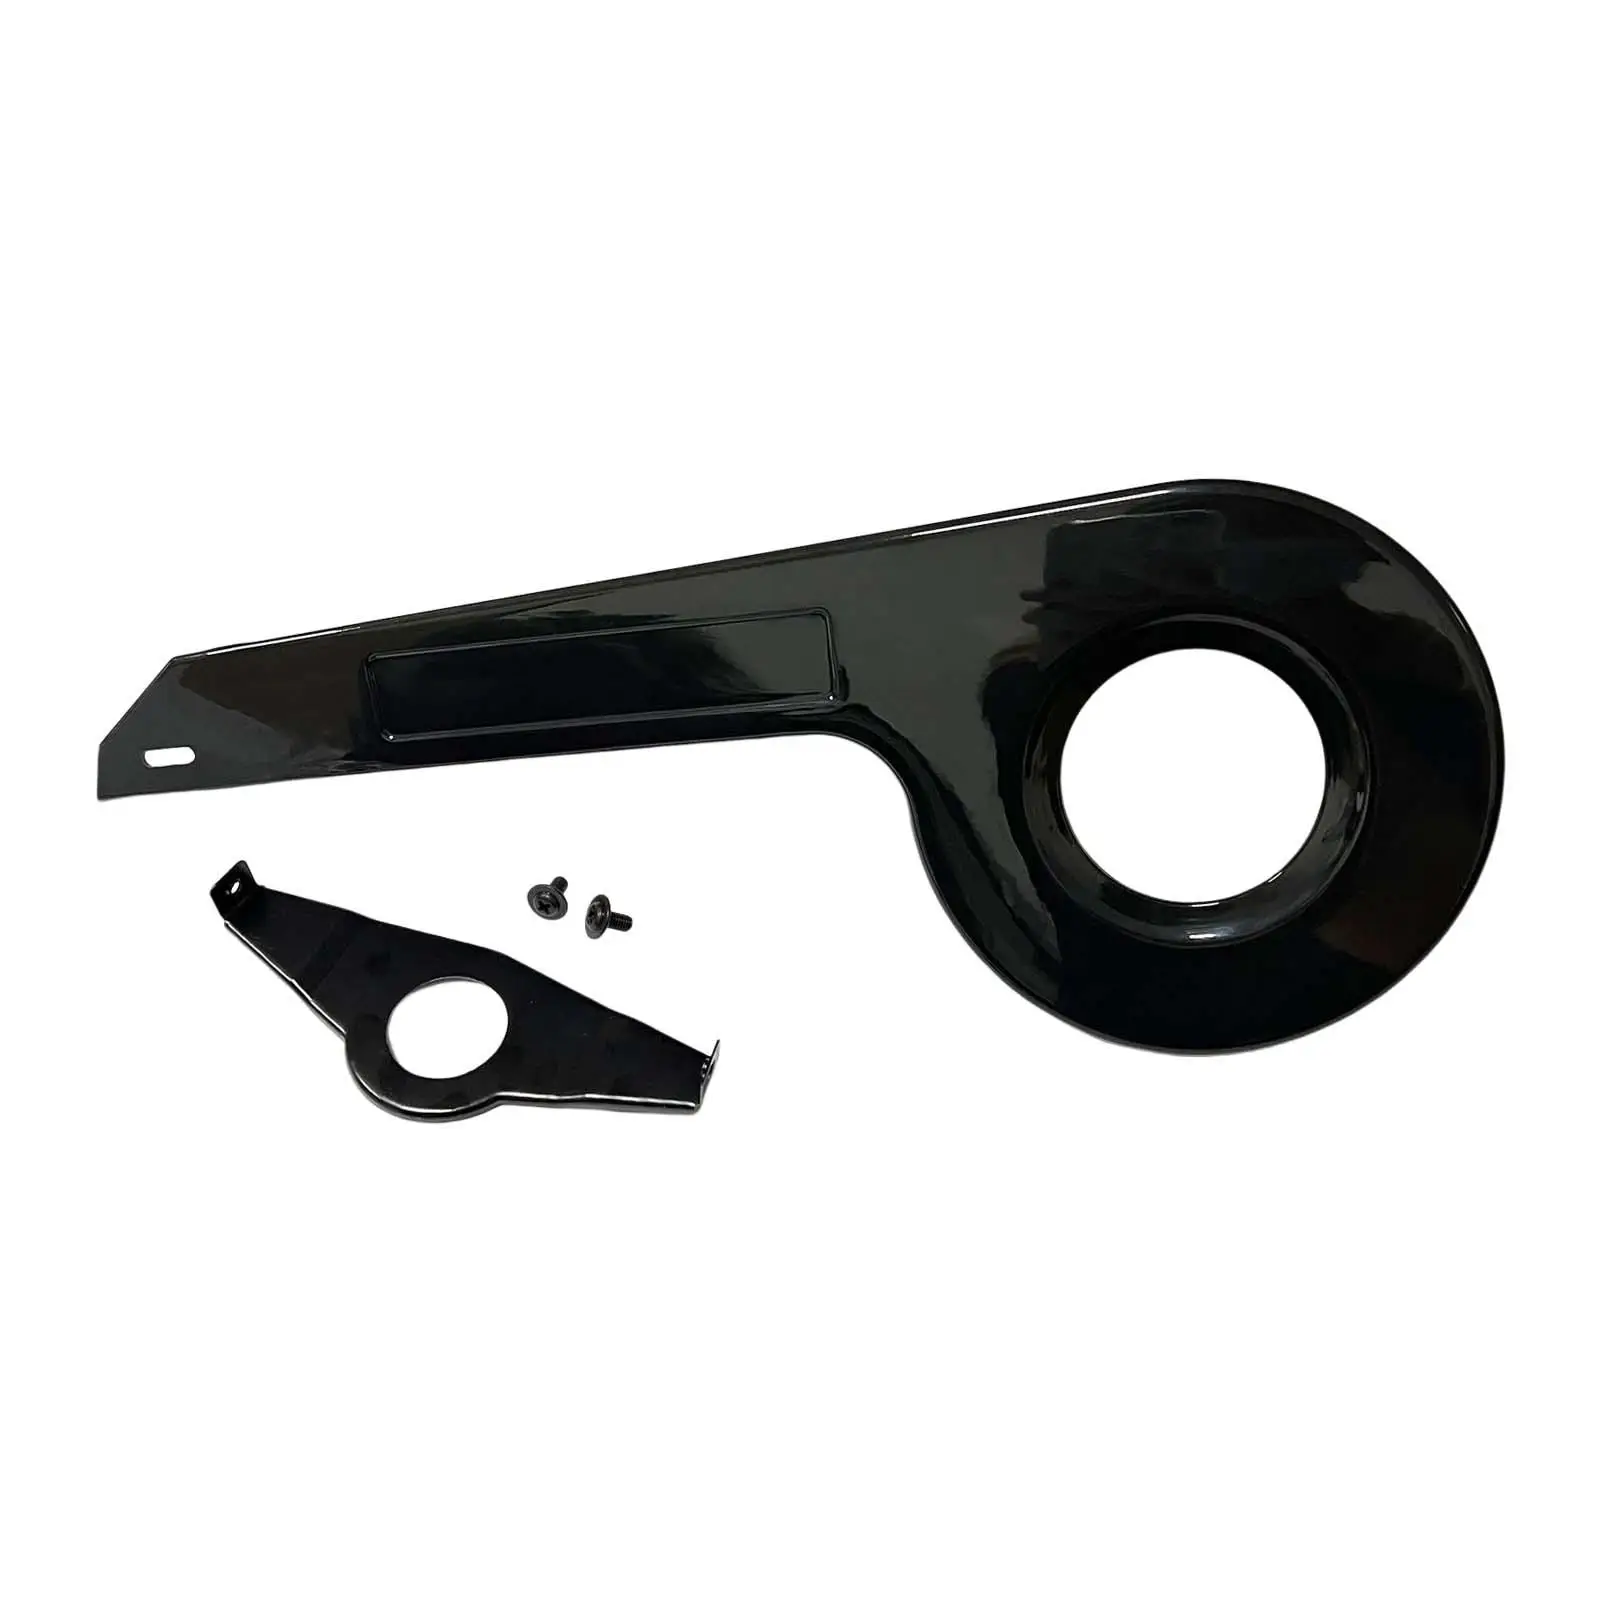 Chainring Protector Repairing for 32-36T Bike Chain Guard Cover